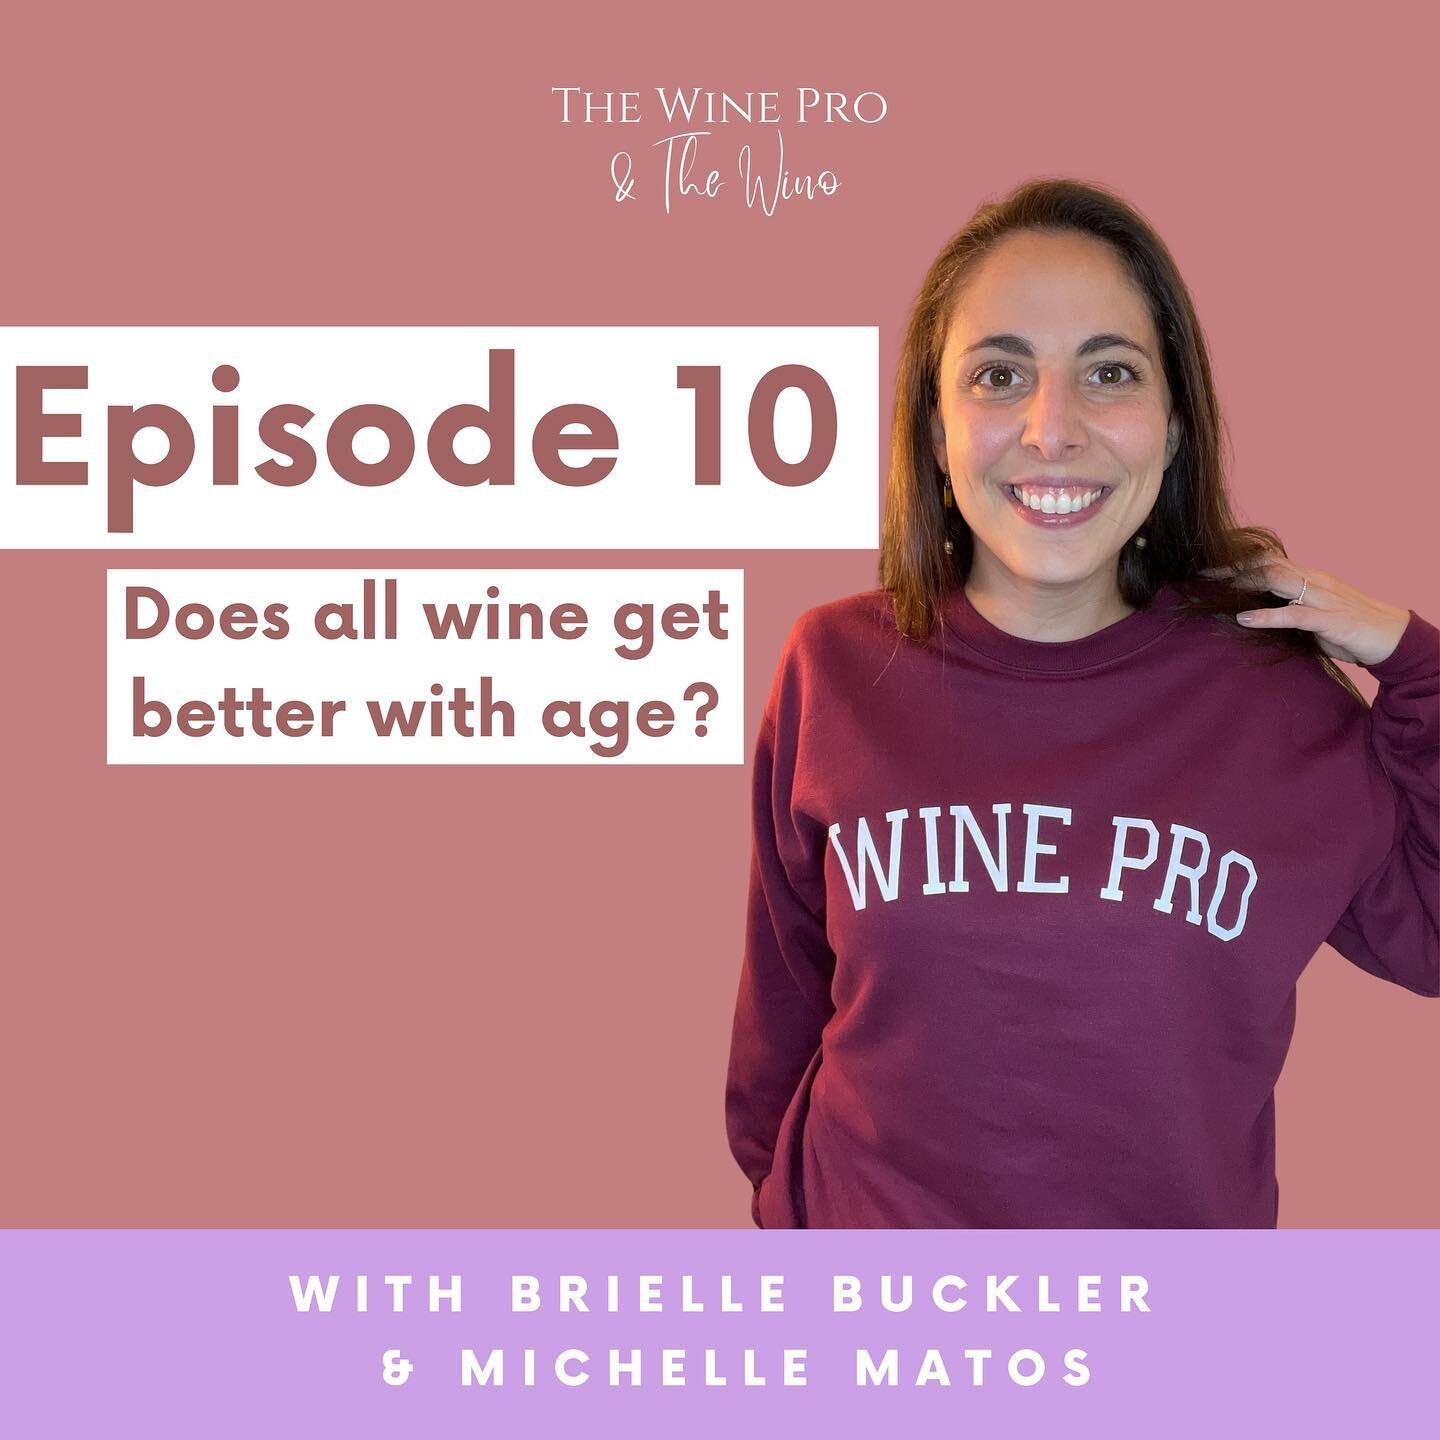 🚨 Episode 10 is live 🚨

In this week&rsquo;s episode we explore what makes certain types of wine age worthy&hellip;and what it means when wine ages. Brielle shares more about the winemaking process and what elements of wine change when wine is stor